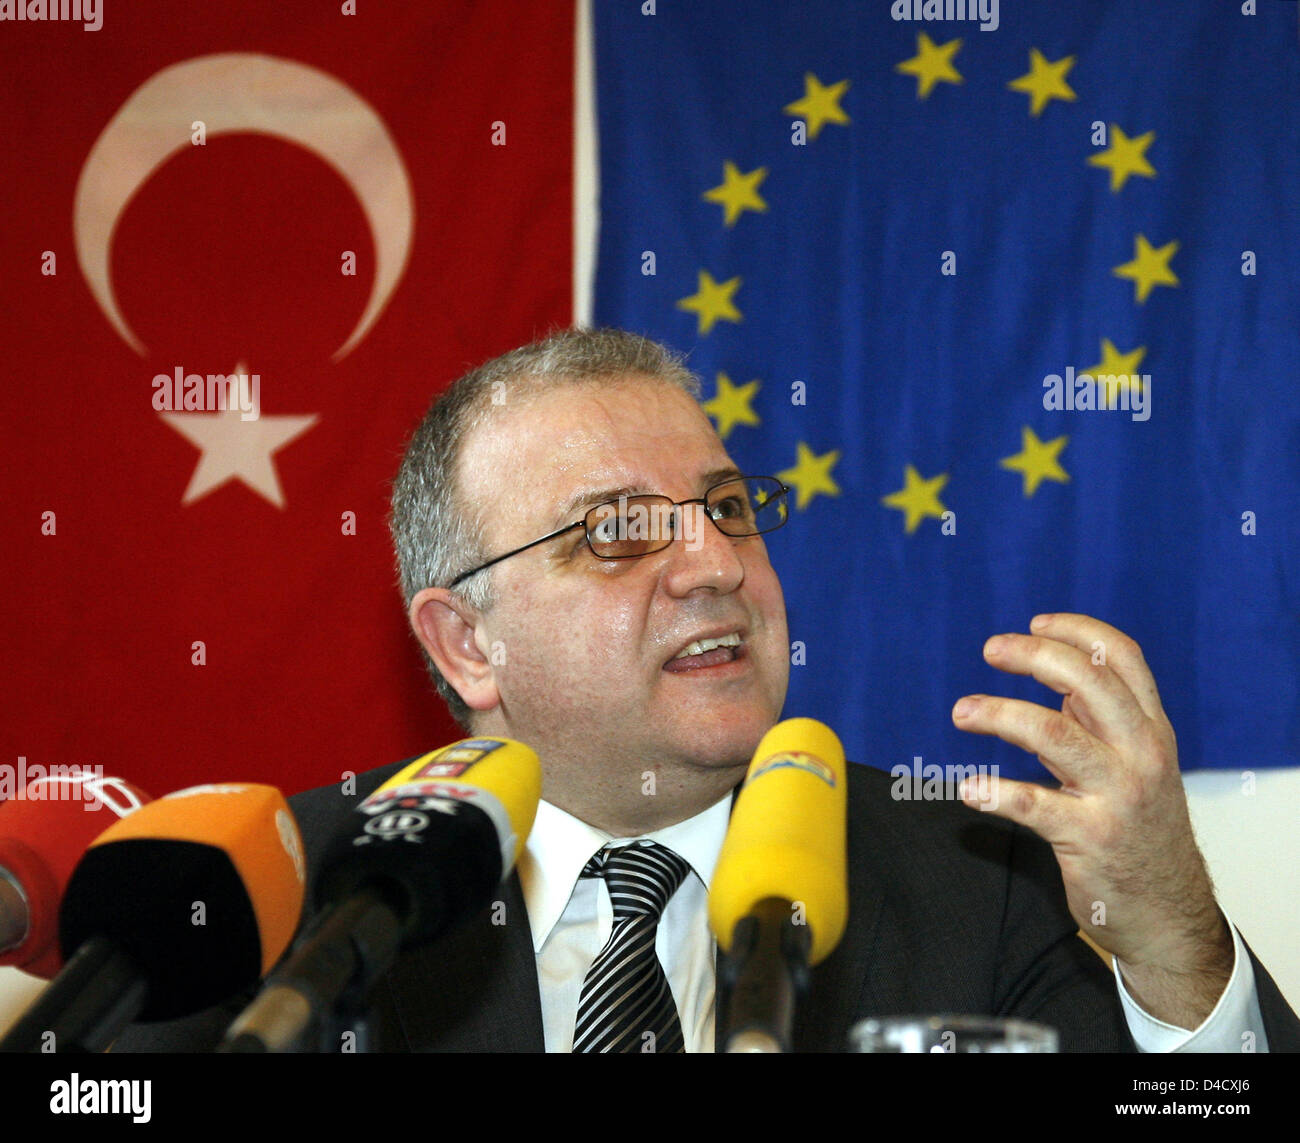 The chairman of the Turkish Community in Germany, Kenan Kolat, gives a press conference in Berlin, Germany, 29 February 2008. Kolat expressed his concern about the situation of Turkish people in Germany, especially after recent unsolved fires in houses inhabited mainly by Turks. Photo: WOLFGANG KUMM Stock Photo